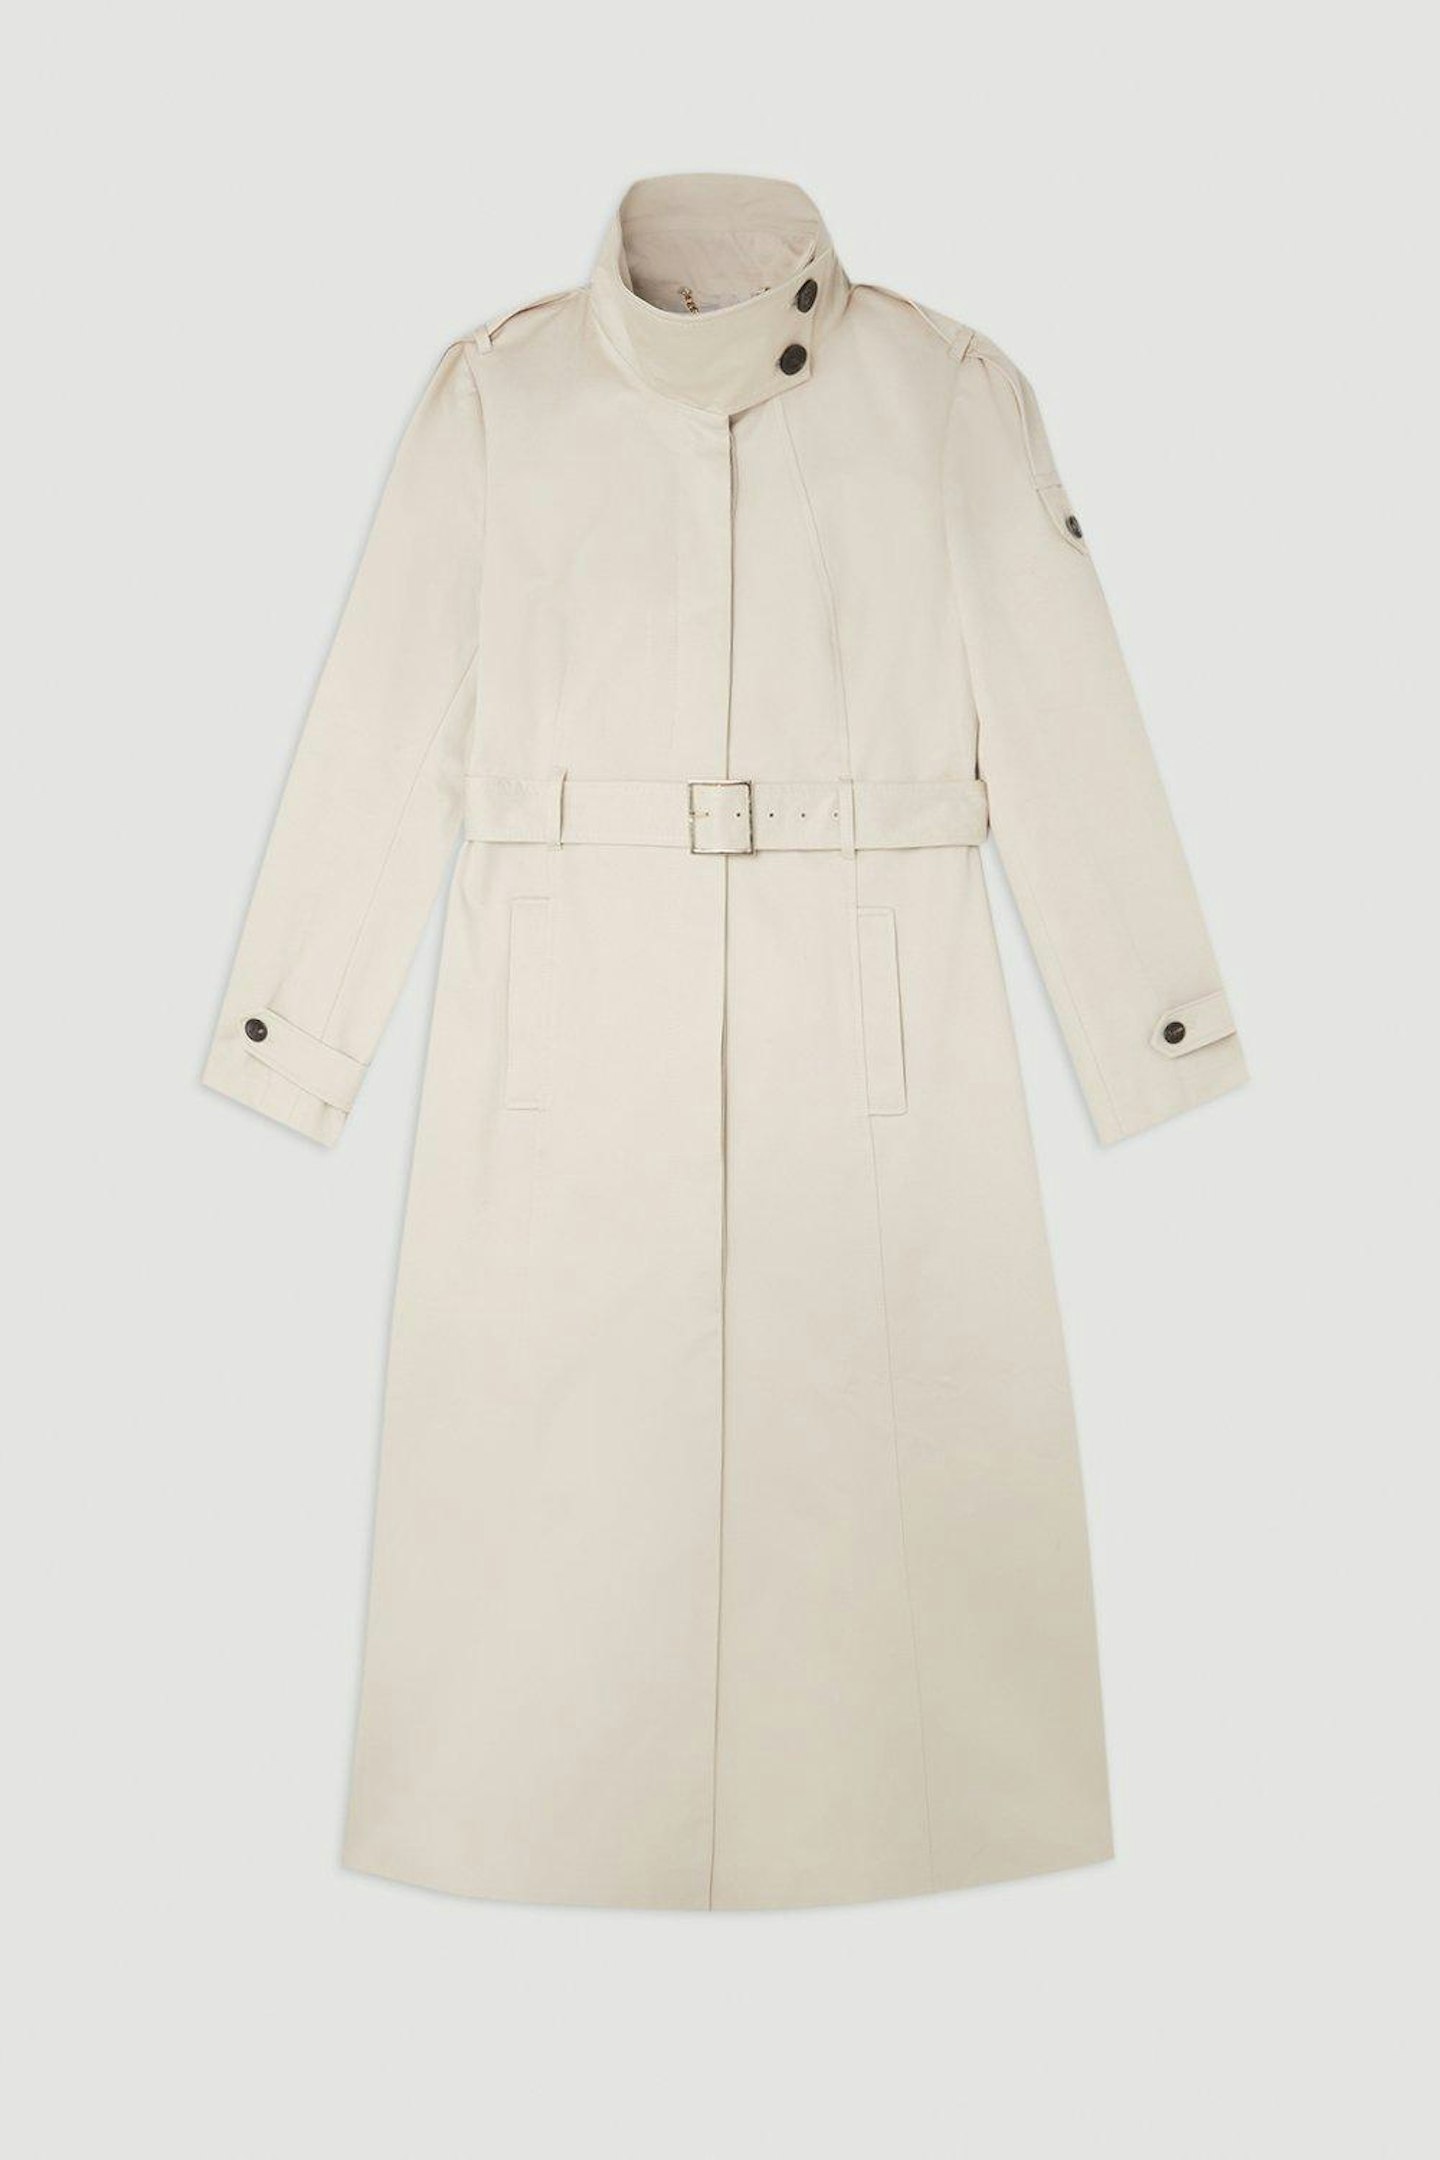 Tailored High Neck Belted Trench Coat